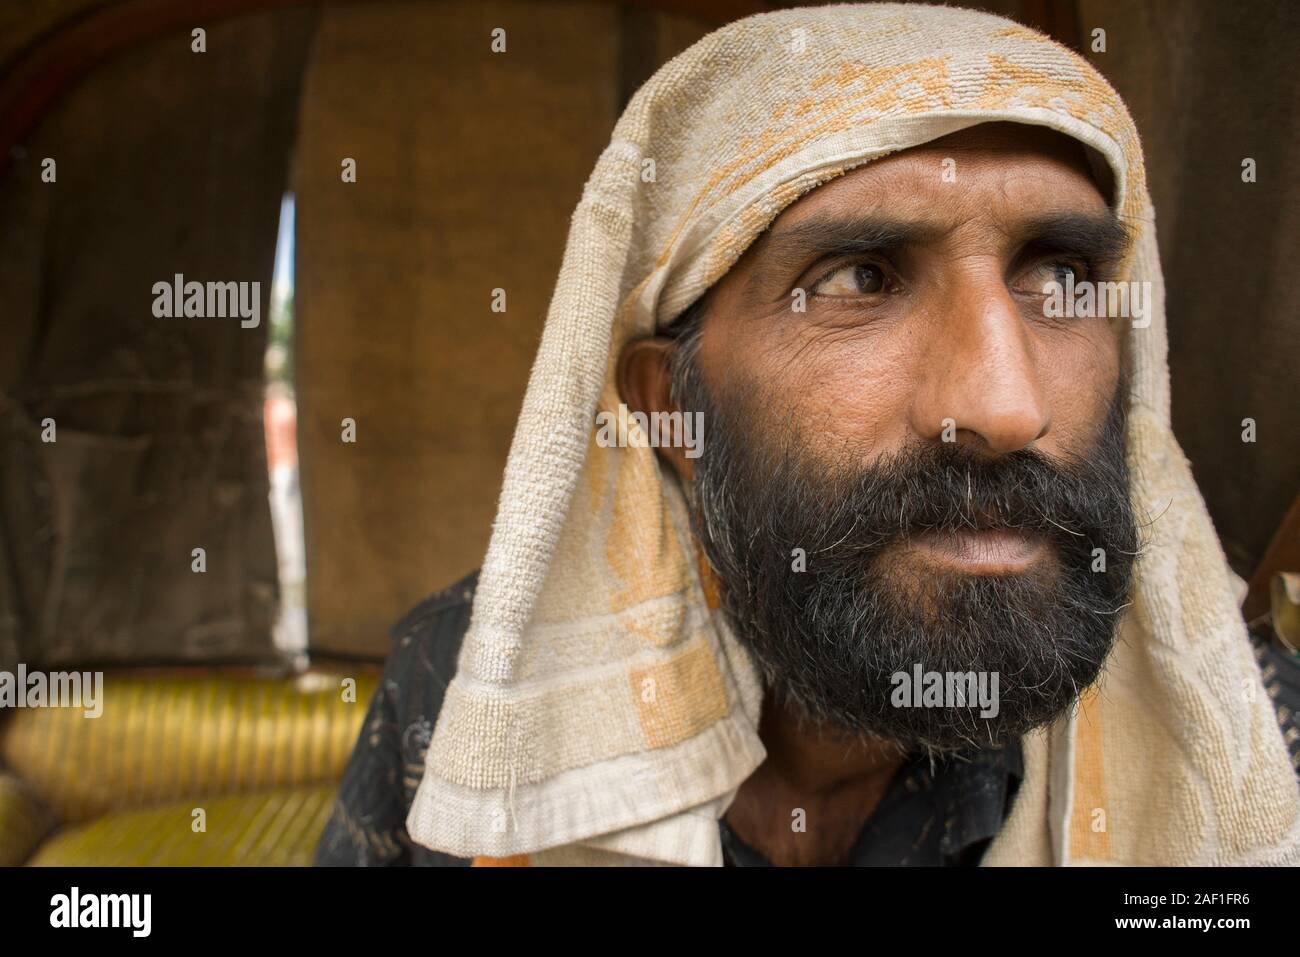 Amritsar, Punjab, India - August 04, 2011: Rickshaw Indian driver with very expressive and exotic face, seated on his vehicle Stock Photo